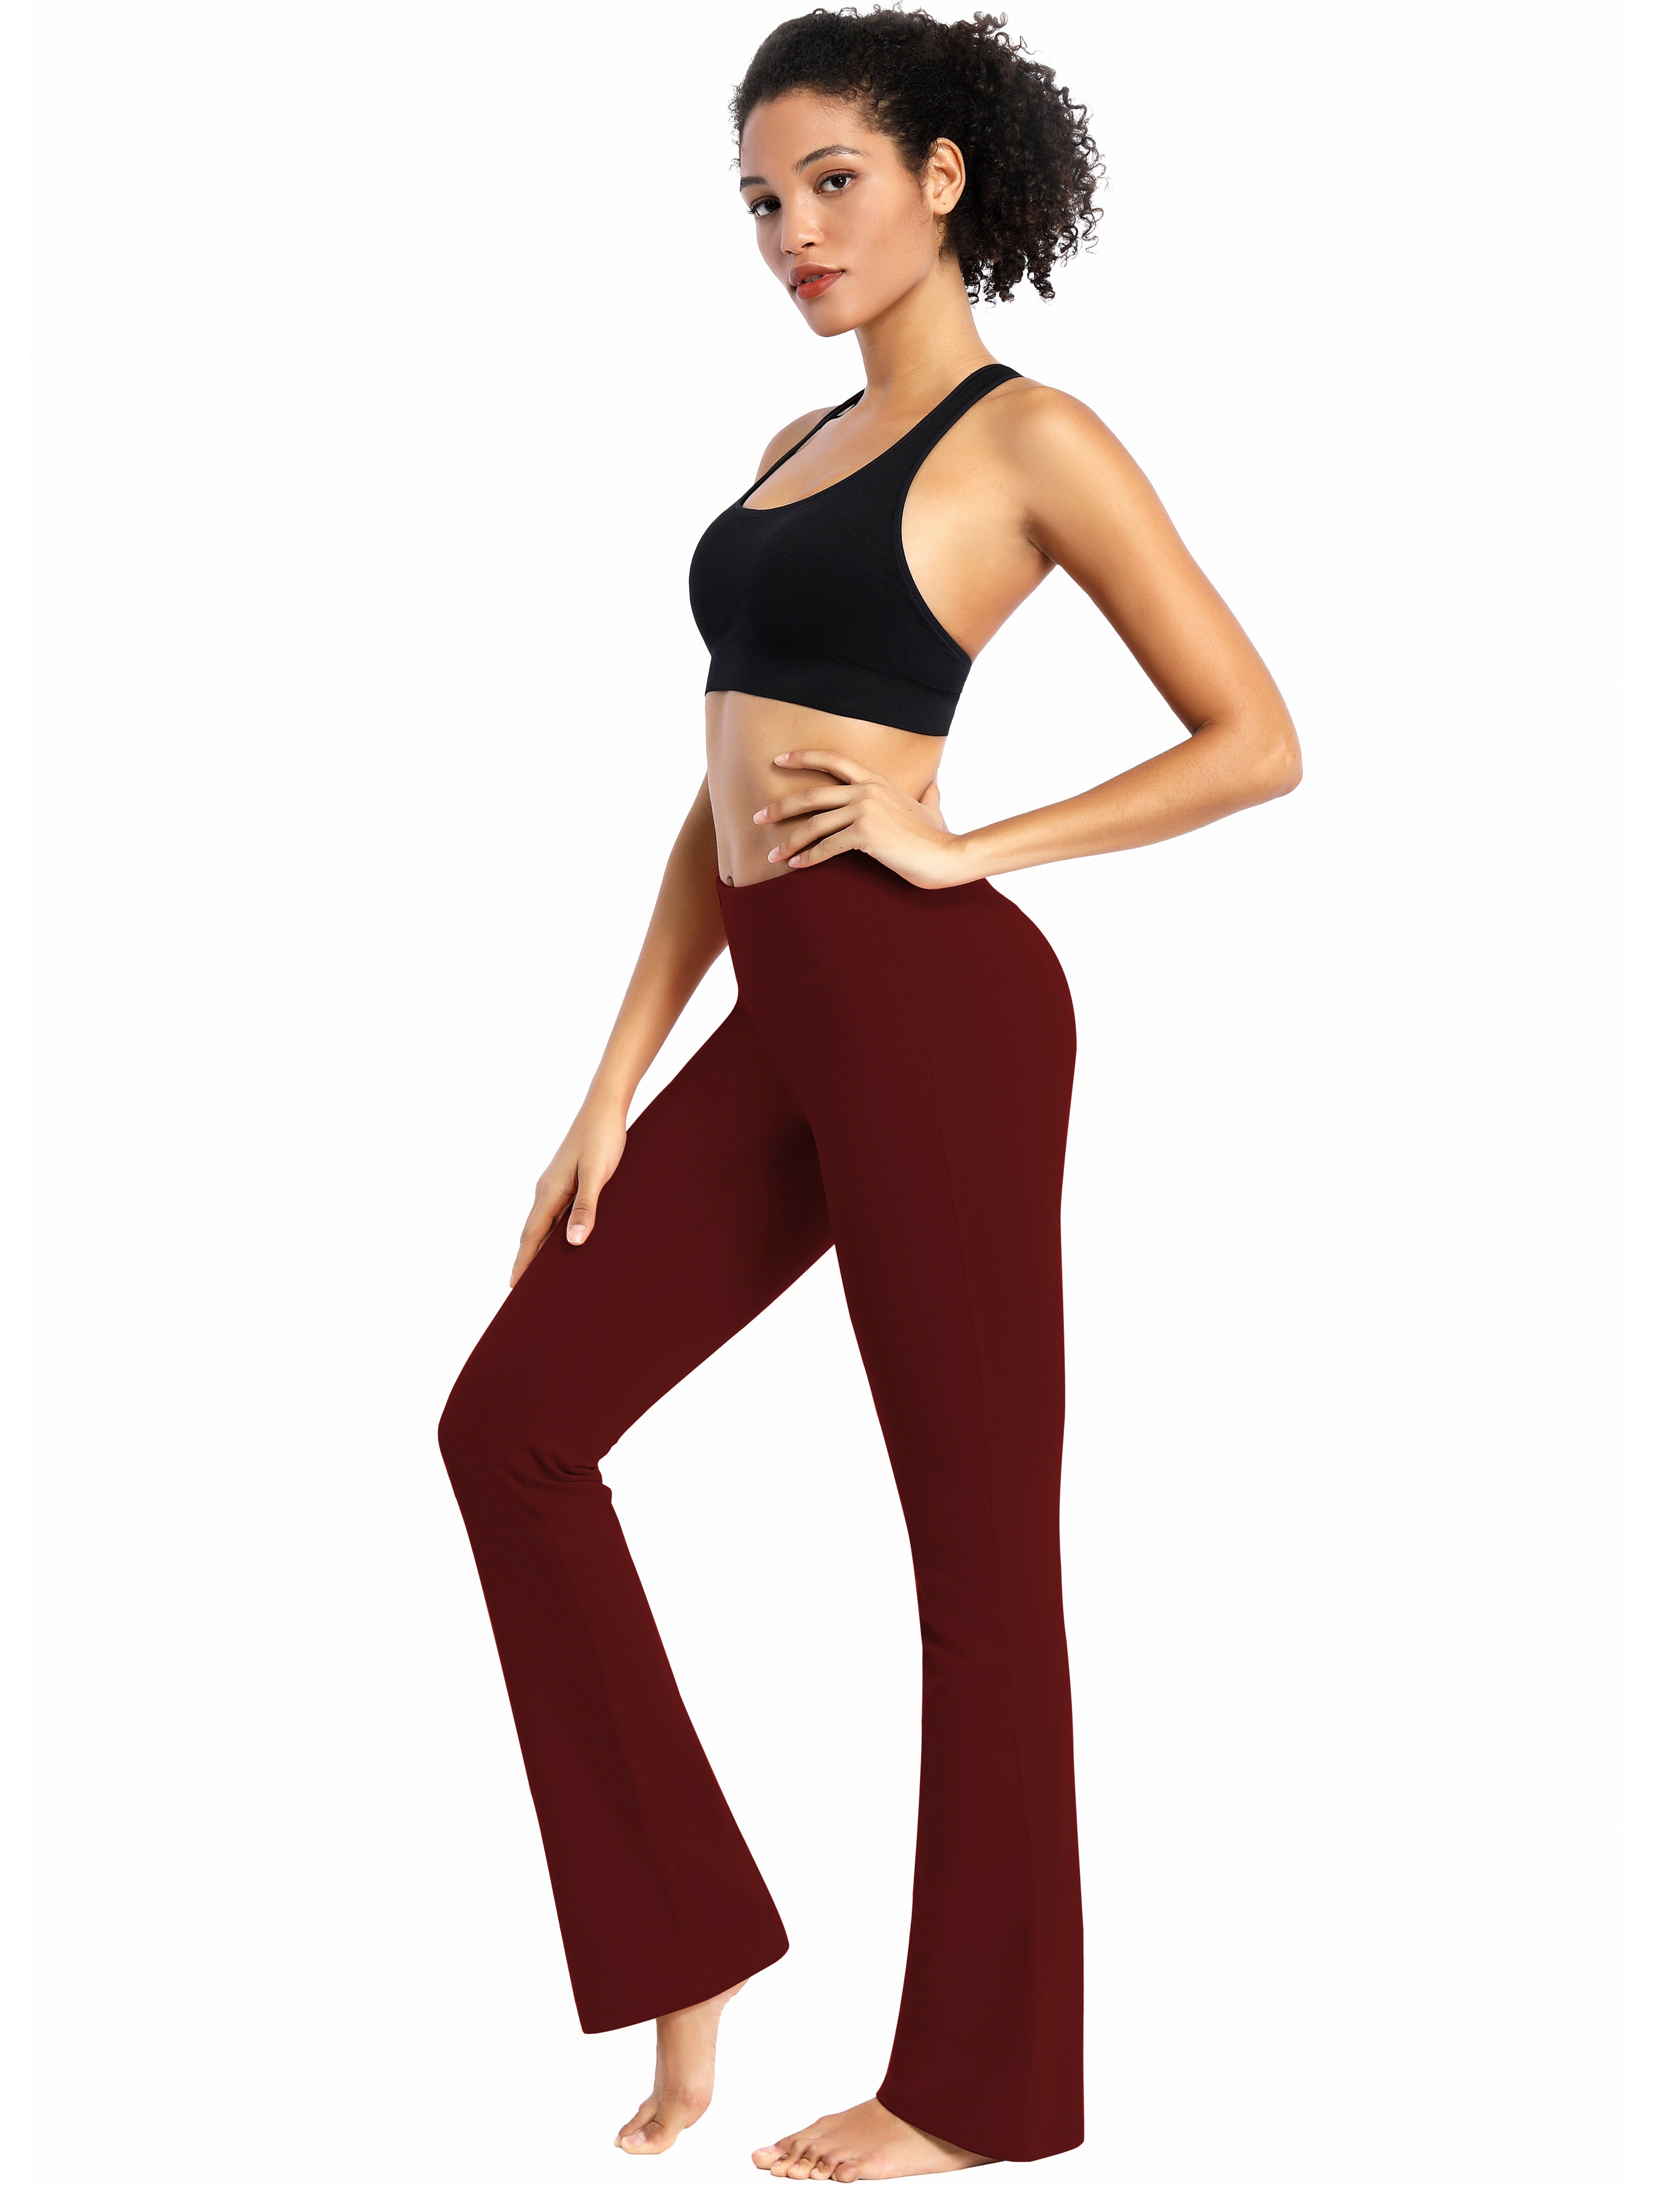 Cotton Nylon Bootcut Leggings cherryred 87%Nylon/13%Spandex (Super soft, cotton feel , 280gsm) Fabric doesn't attract lint easily 4-way stretch No see-through Moisture-wicking Inner pocket Four lengths